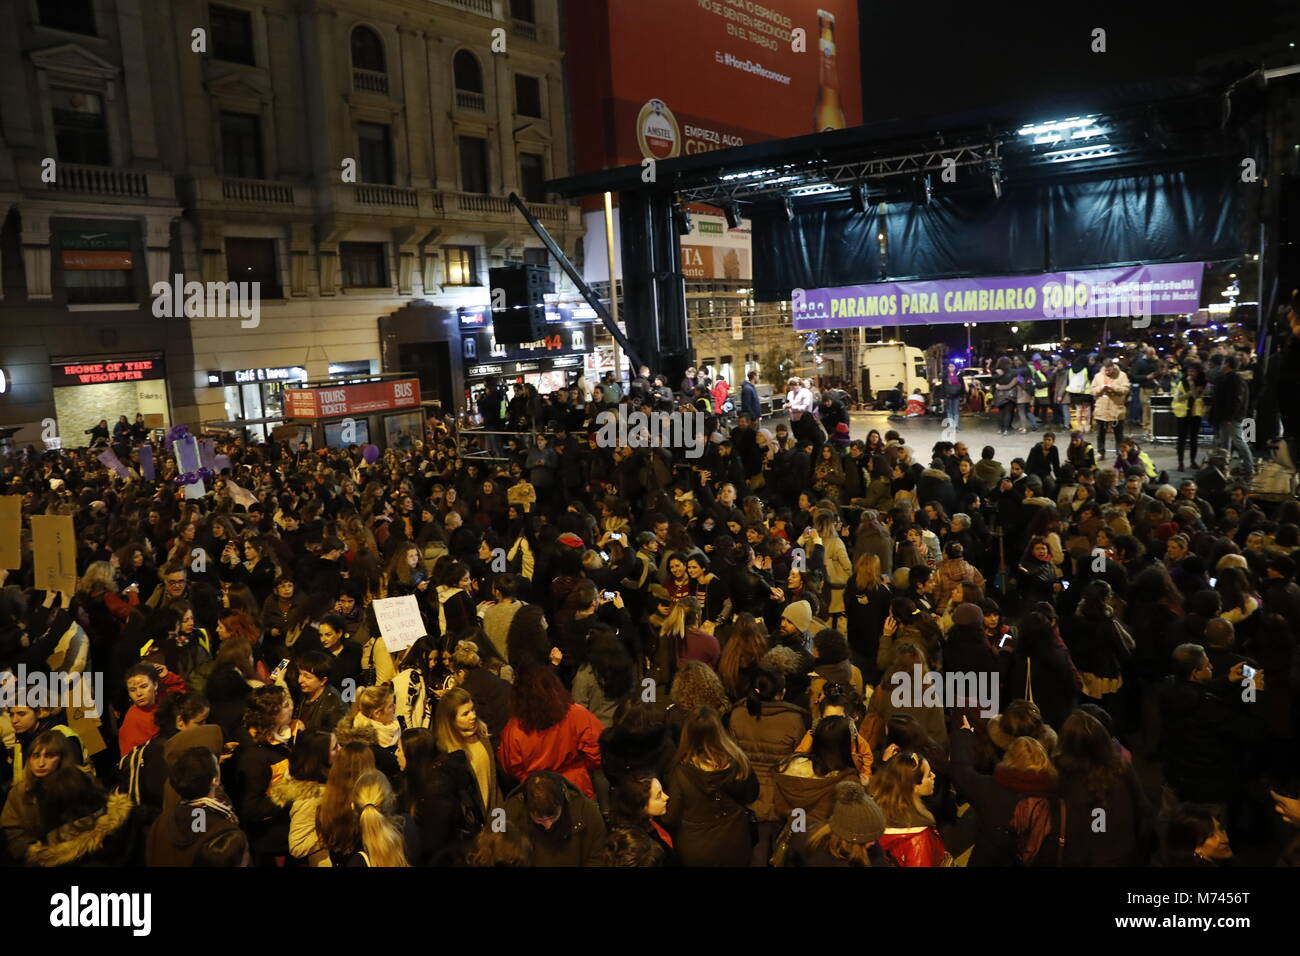 Spanish women during a gathering to celebrate International Women's Day in Puerta del Sol in Madrid, Madrid, Thursday March 8, 2018. Credit: Gtres Información más Comuniación on line, S.L./Alamy Live News Stock Photo